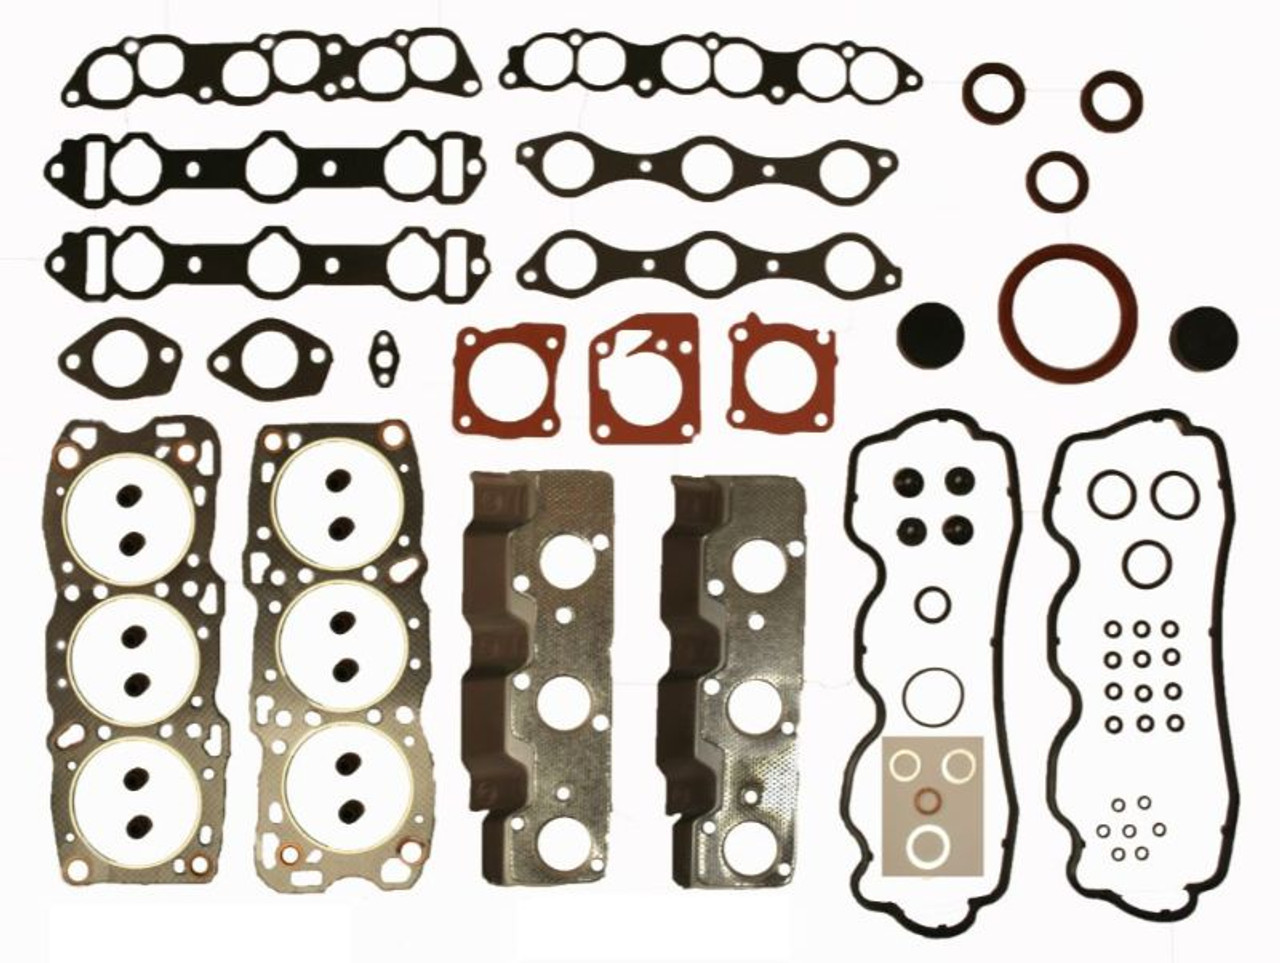 1995 Plymouth Voyager 3.0L Engine Gasket Set CR3.0-49 -76